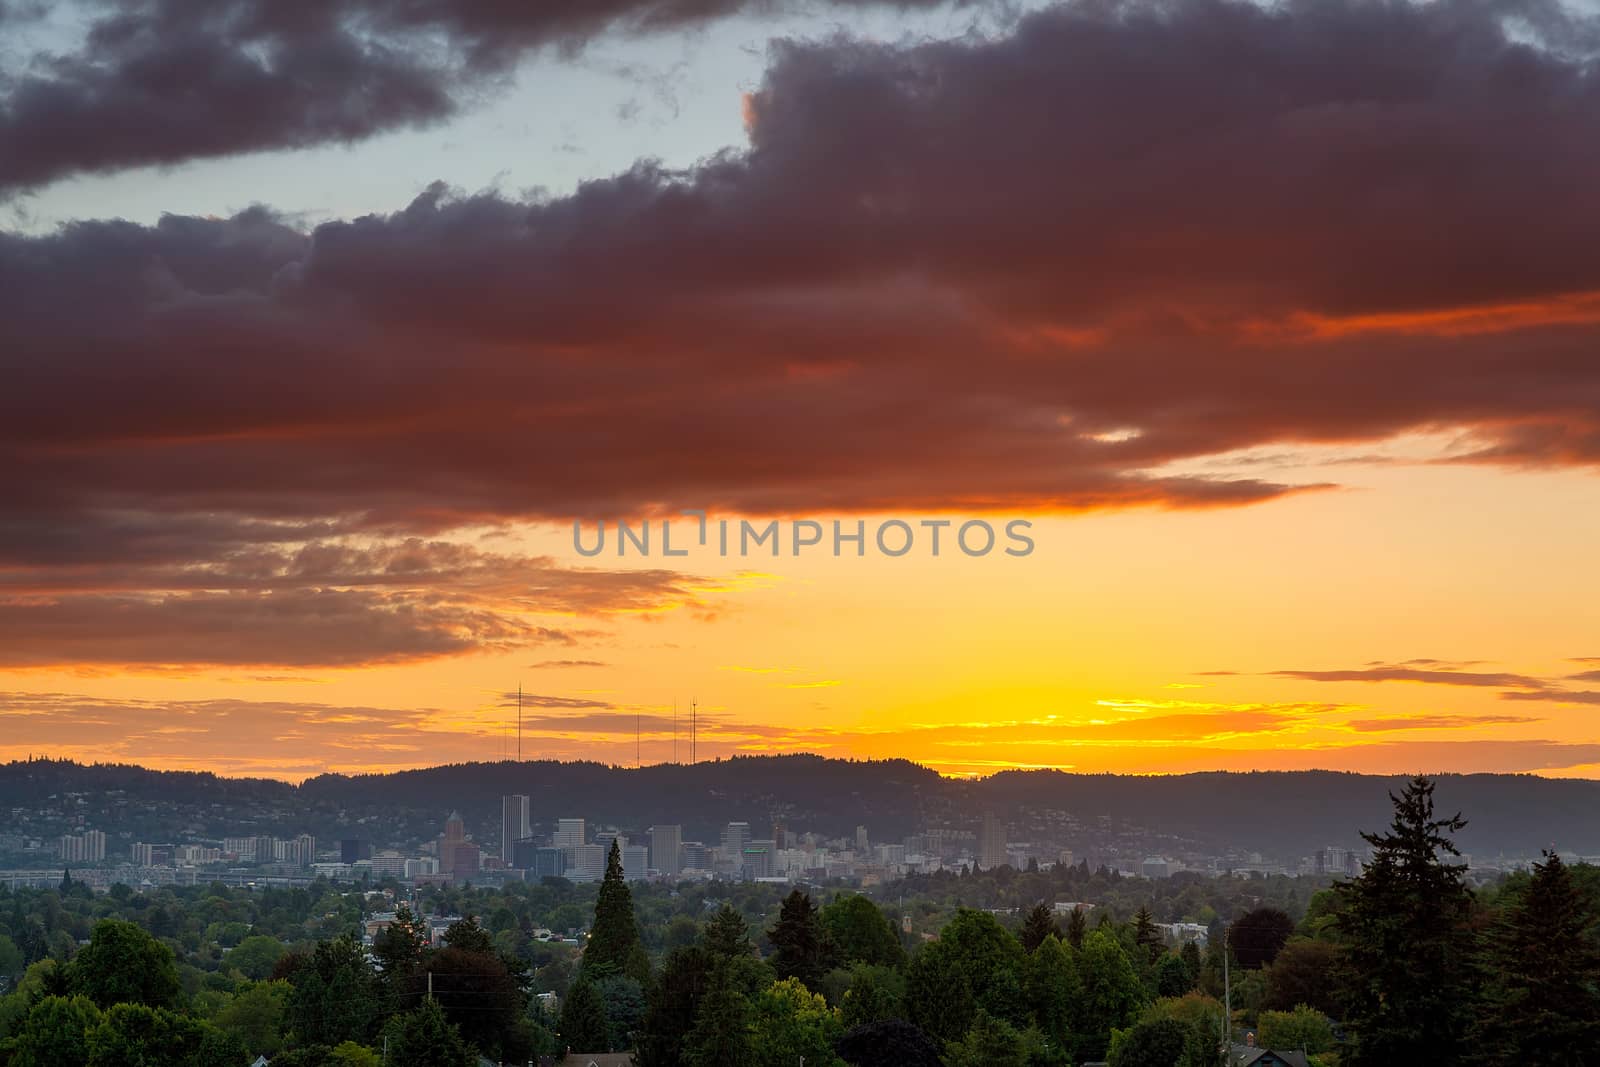 Colorful sunset over city of Portland Oregon downtown skyline panoramic view